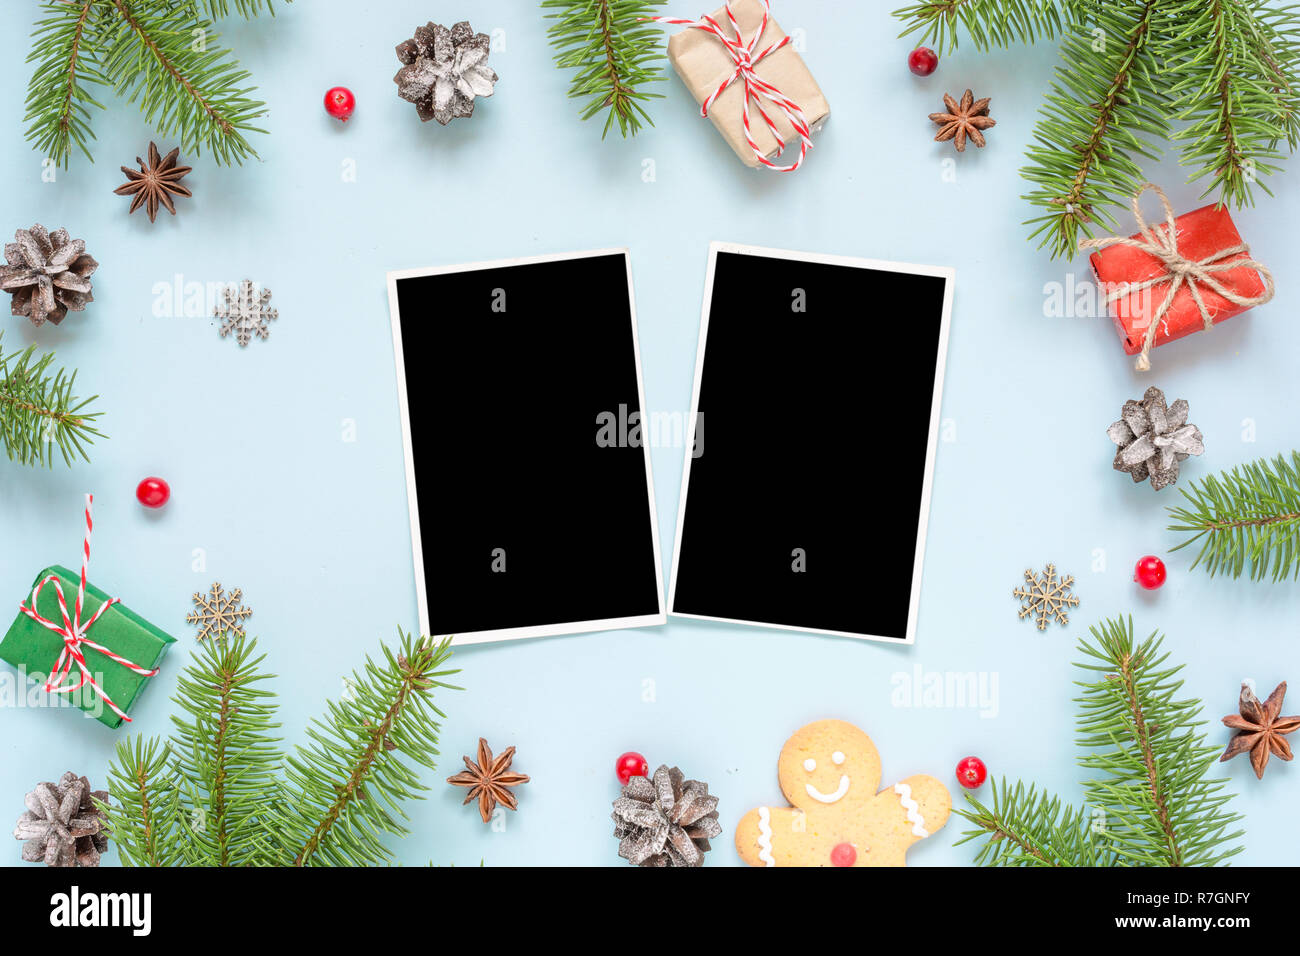 christmas blank photo cards in frame made of fir tree branches, decorations and gift boxes over blue background. mock up. flat lay. top view Stock Photo